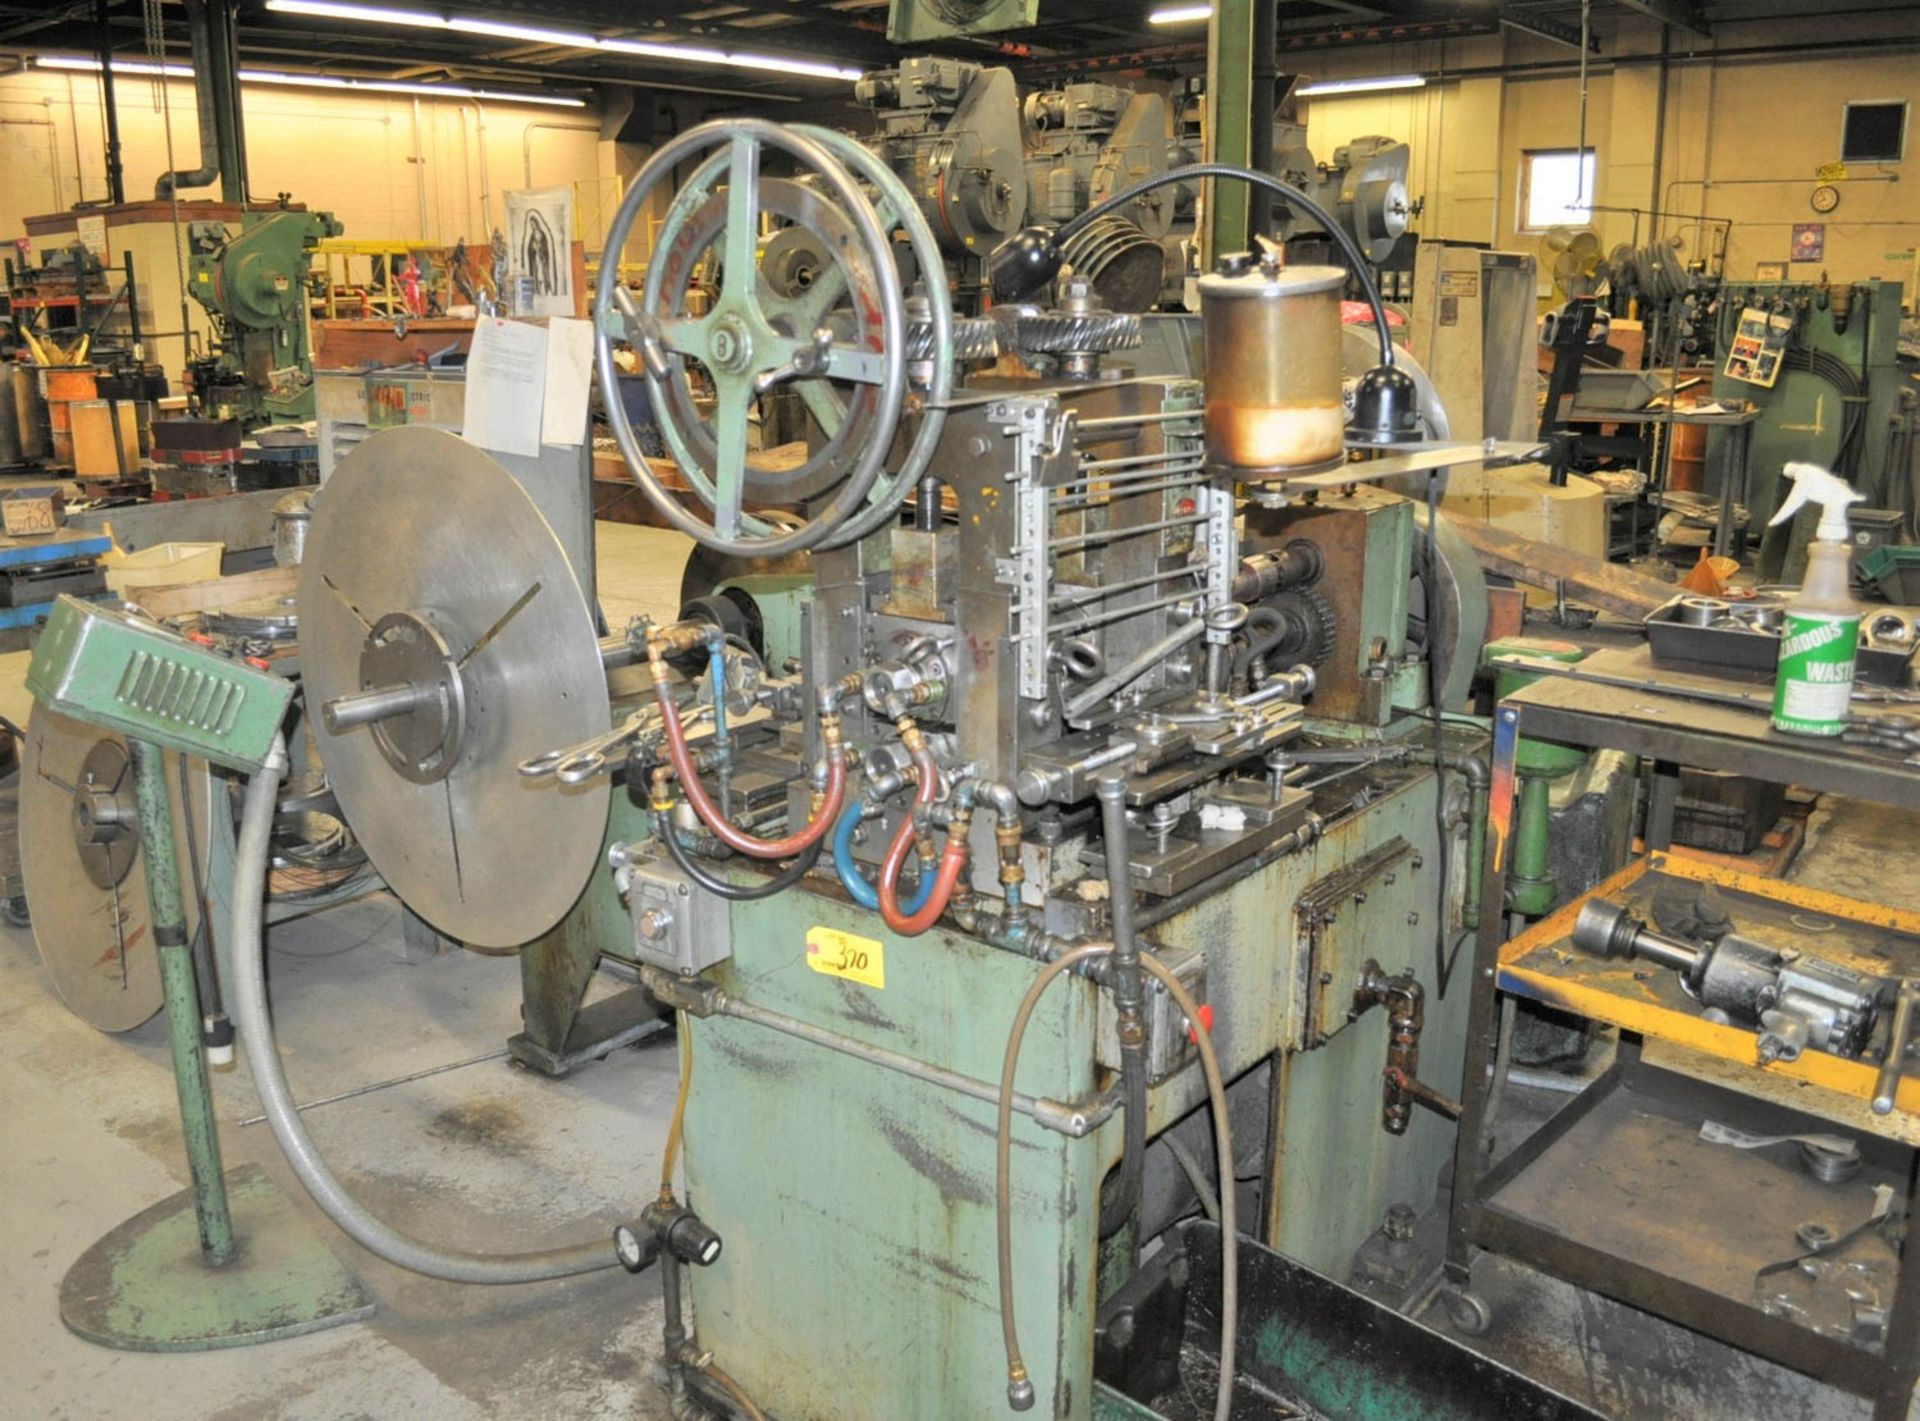 3" X 8" FENN 2-HI ROLLING MILL, VARI-SPEED CONTROL, CONTROL CONSOLE, APPROXIMATELY 300-FPM, STAND-UP